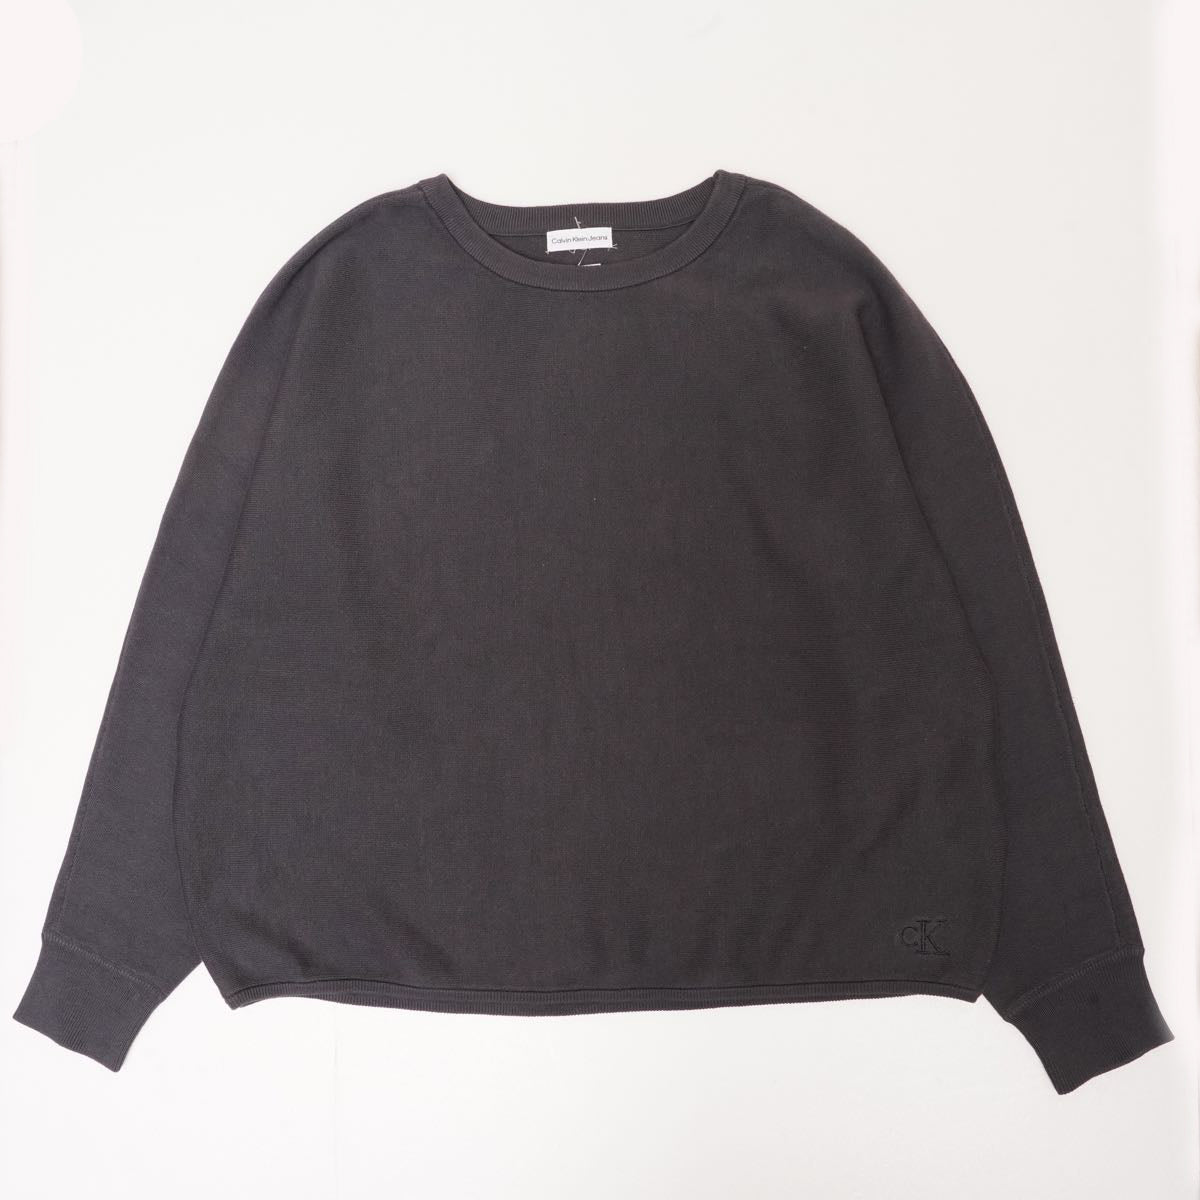 CK カルバンクライン ジーンズ グレー シームレス コットンニット カットソー  CALVIN KLEIN JEANS GRAY SEAMLESS COTTON KNIT CUT AND  SEW WOMENS